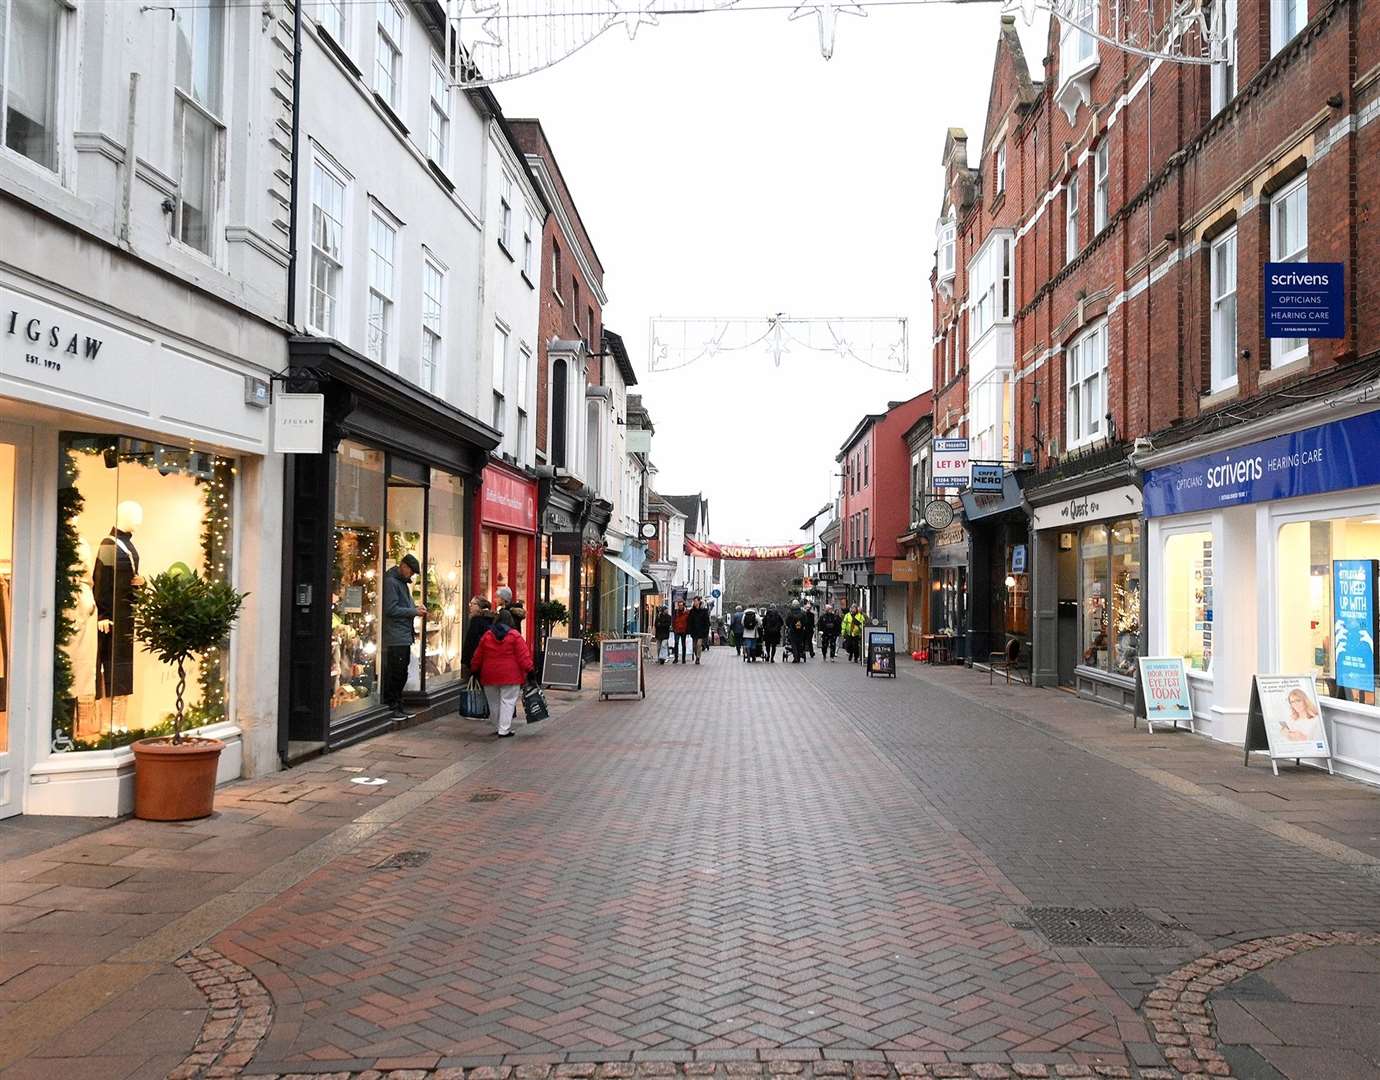 Abbeygate Street, a shopping street in the heart of Bury St Edmunds. Picture: Mecha Morton